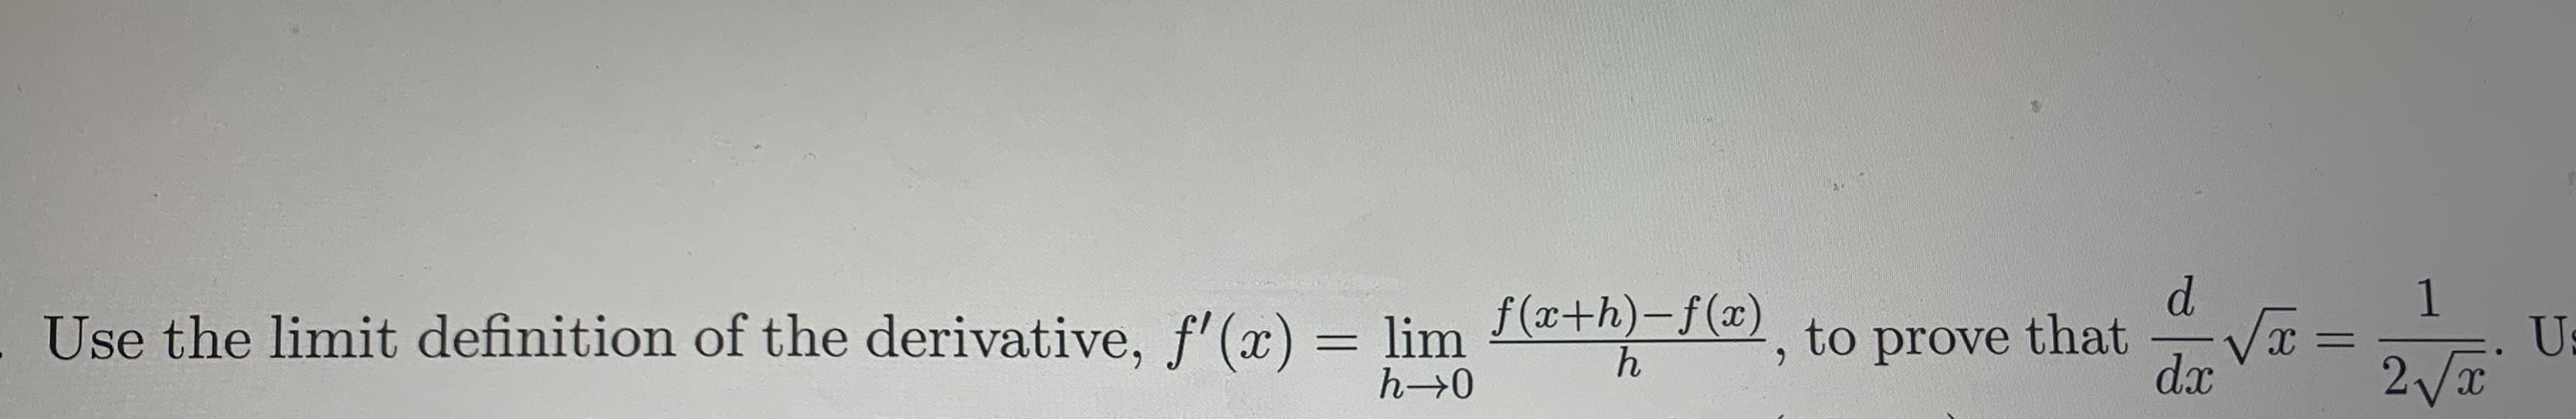 d.
Use the limit definition of the derivative, f (x) = lim
f (x+h)-f(x)
1
+h)=j, to prove that VT =
6.
h→0
dx
